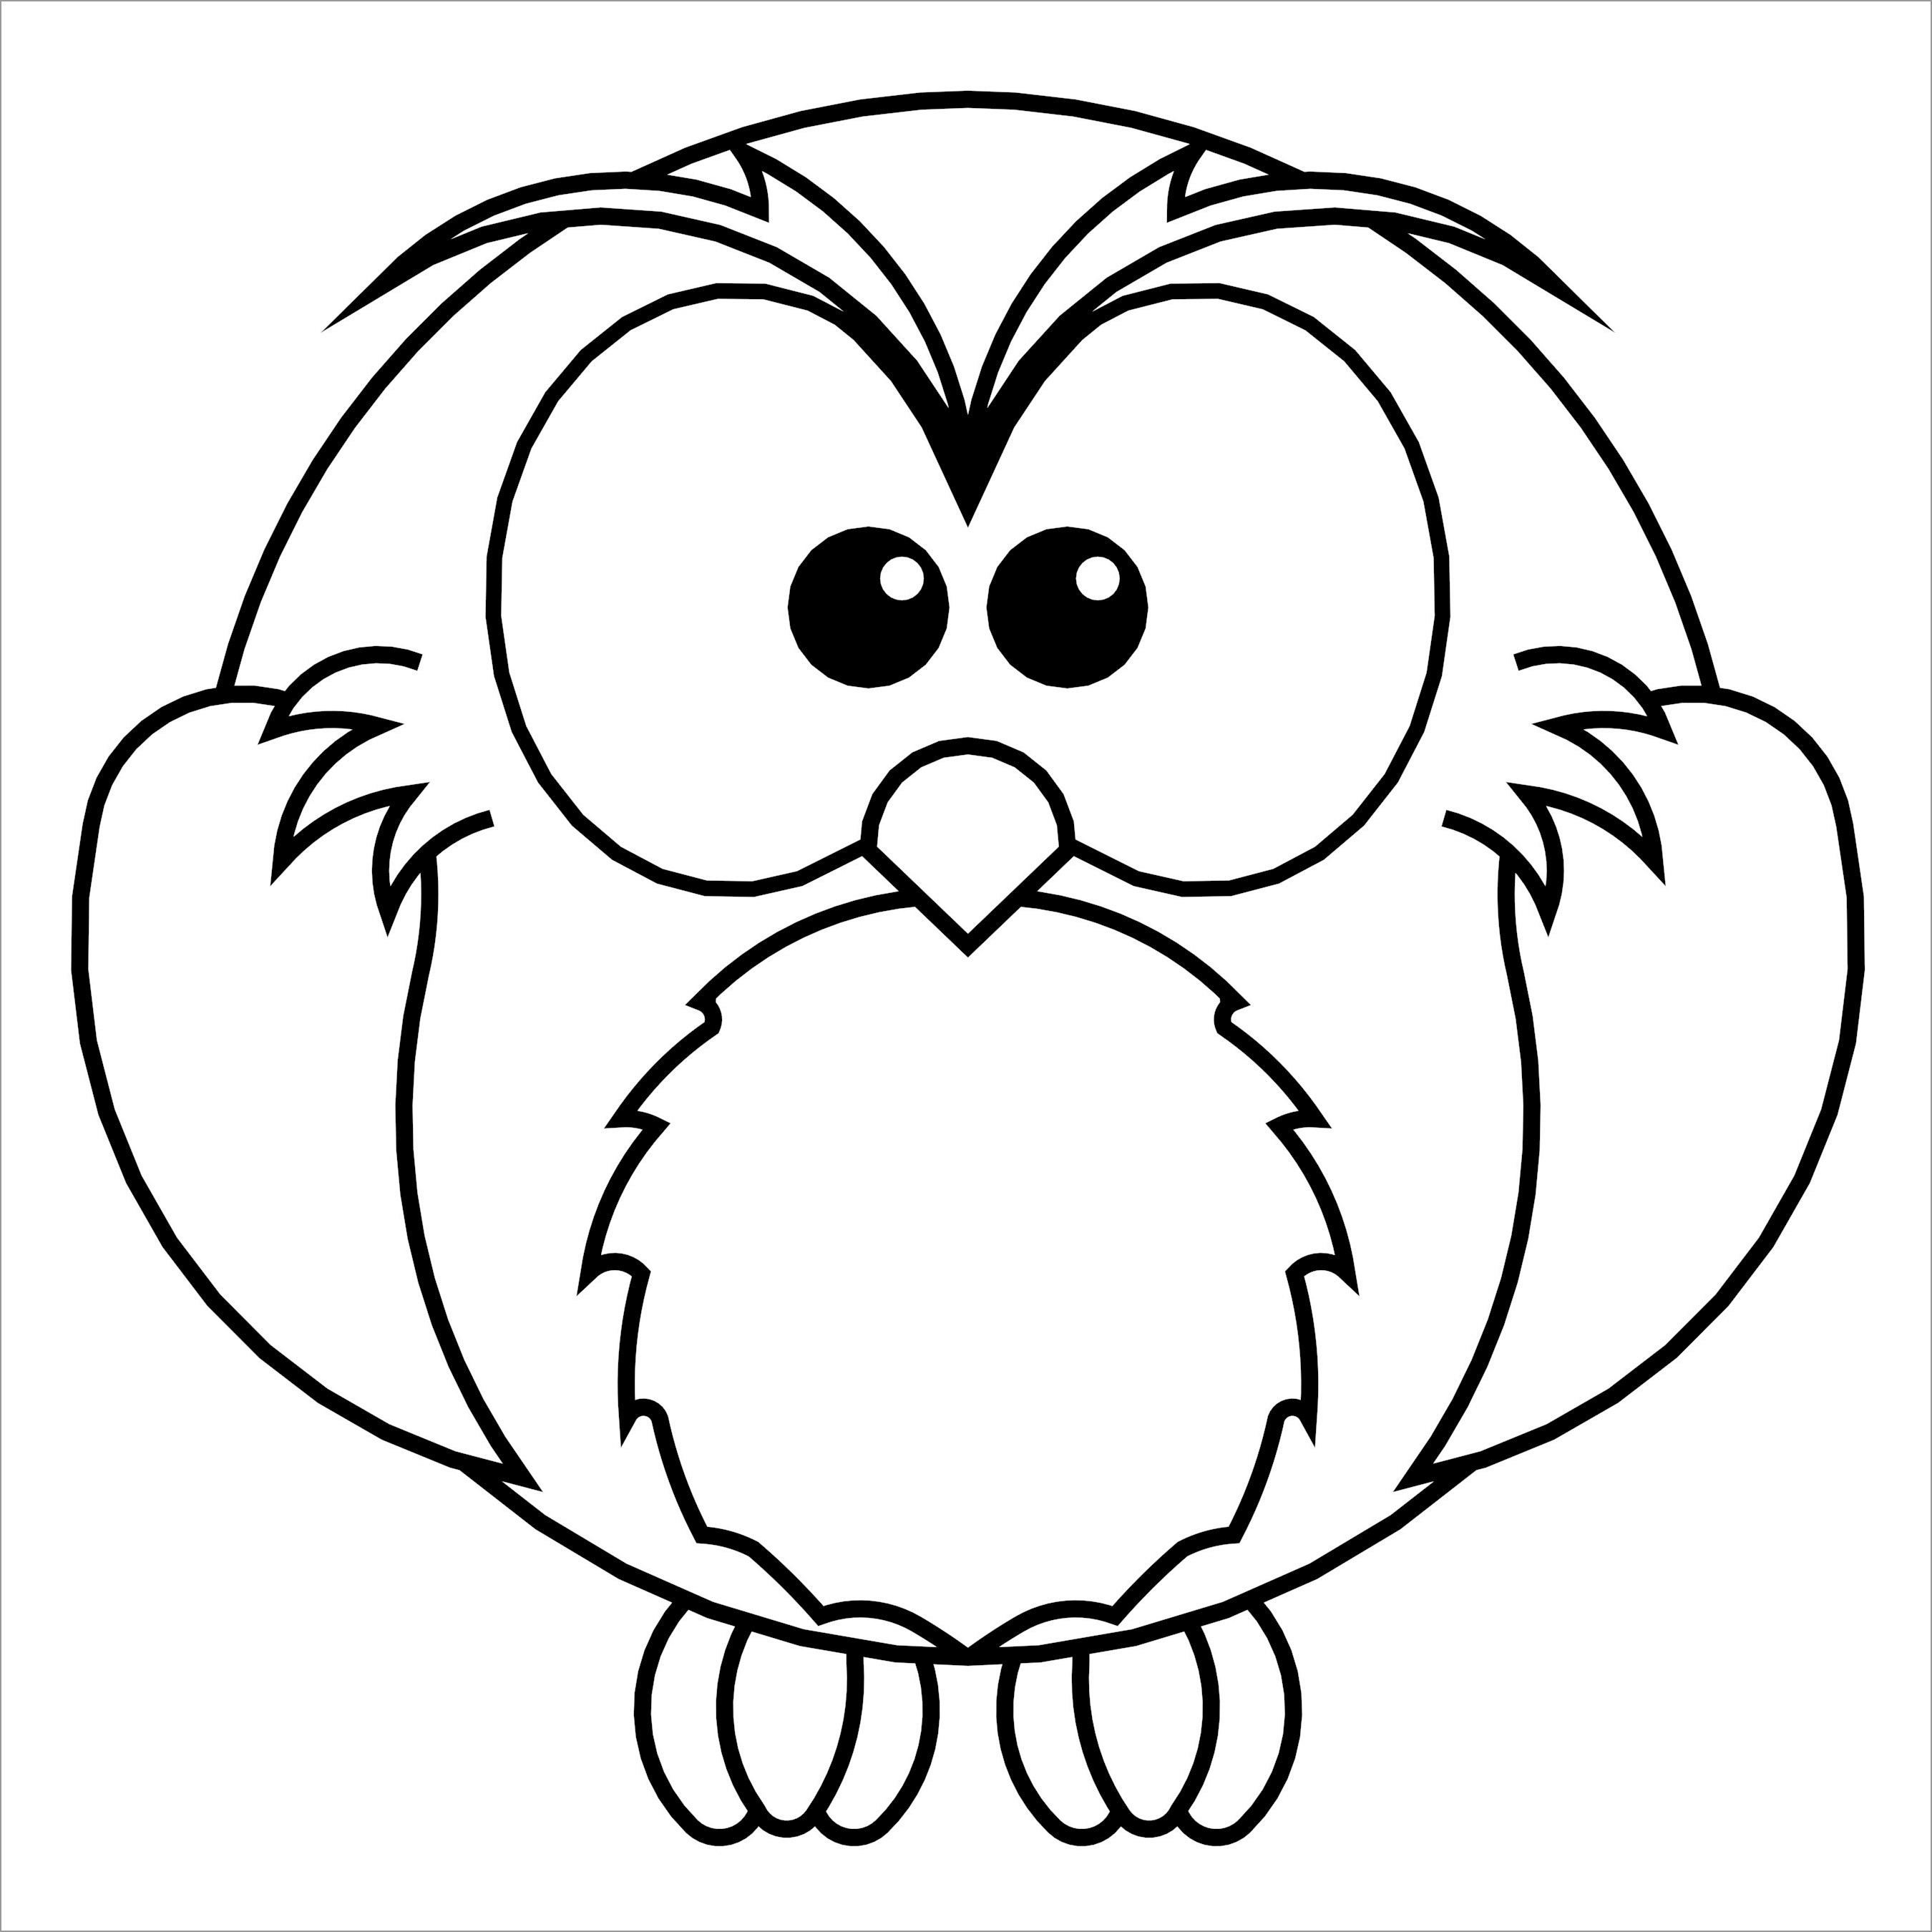 Easy Owl Coloring Pages for Preschool